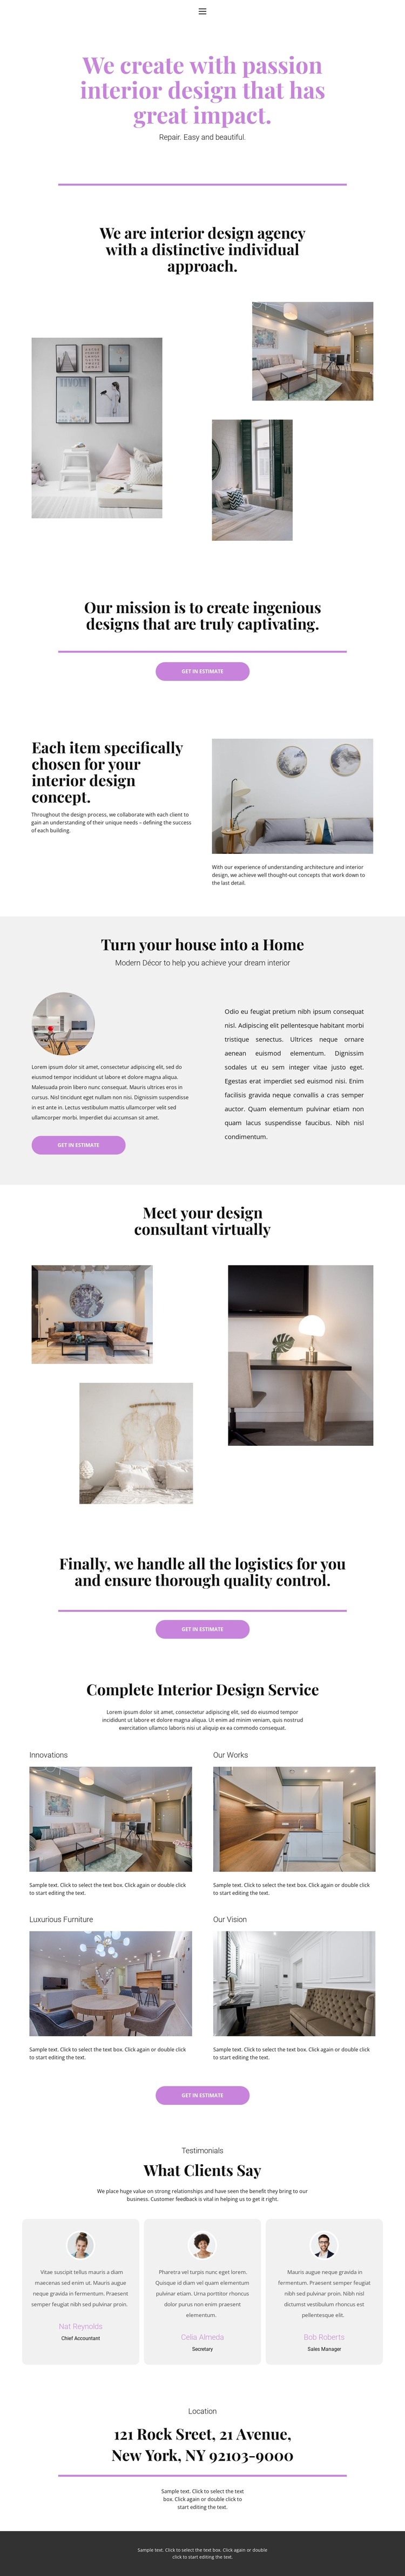 Choice of design for the house Web Design